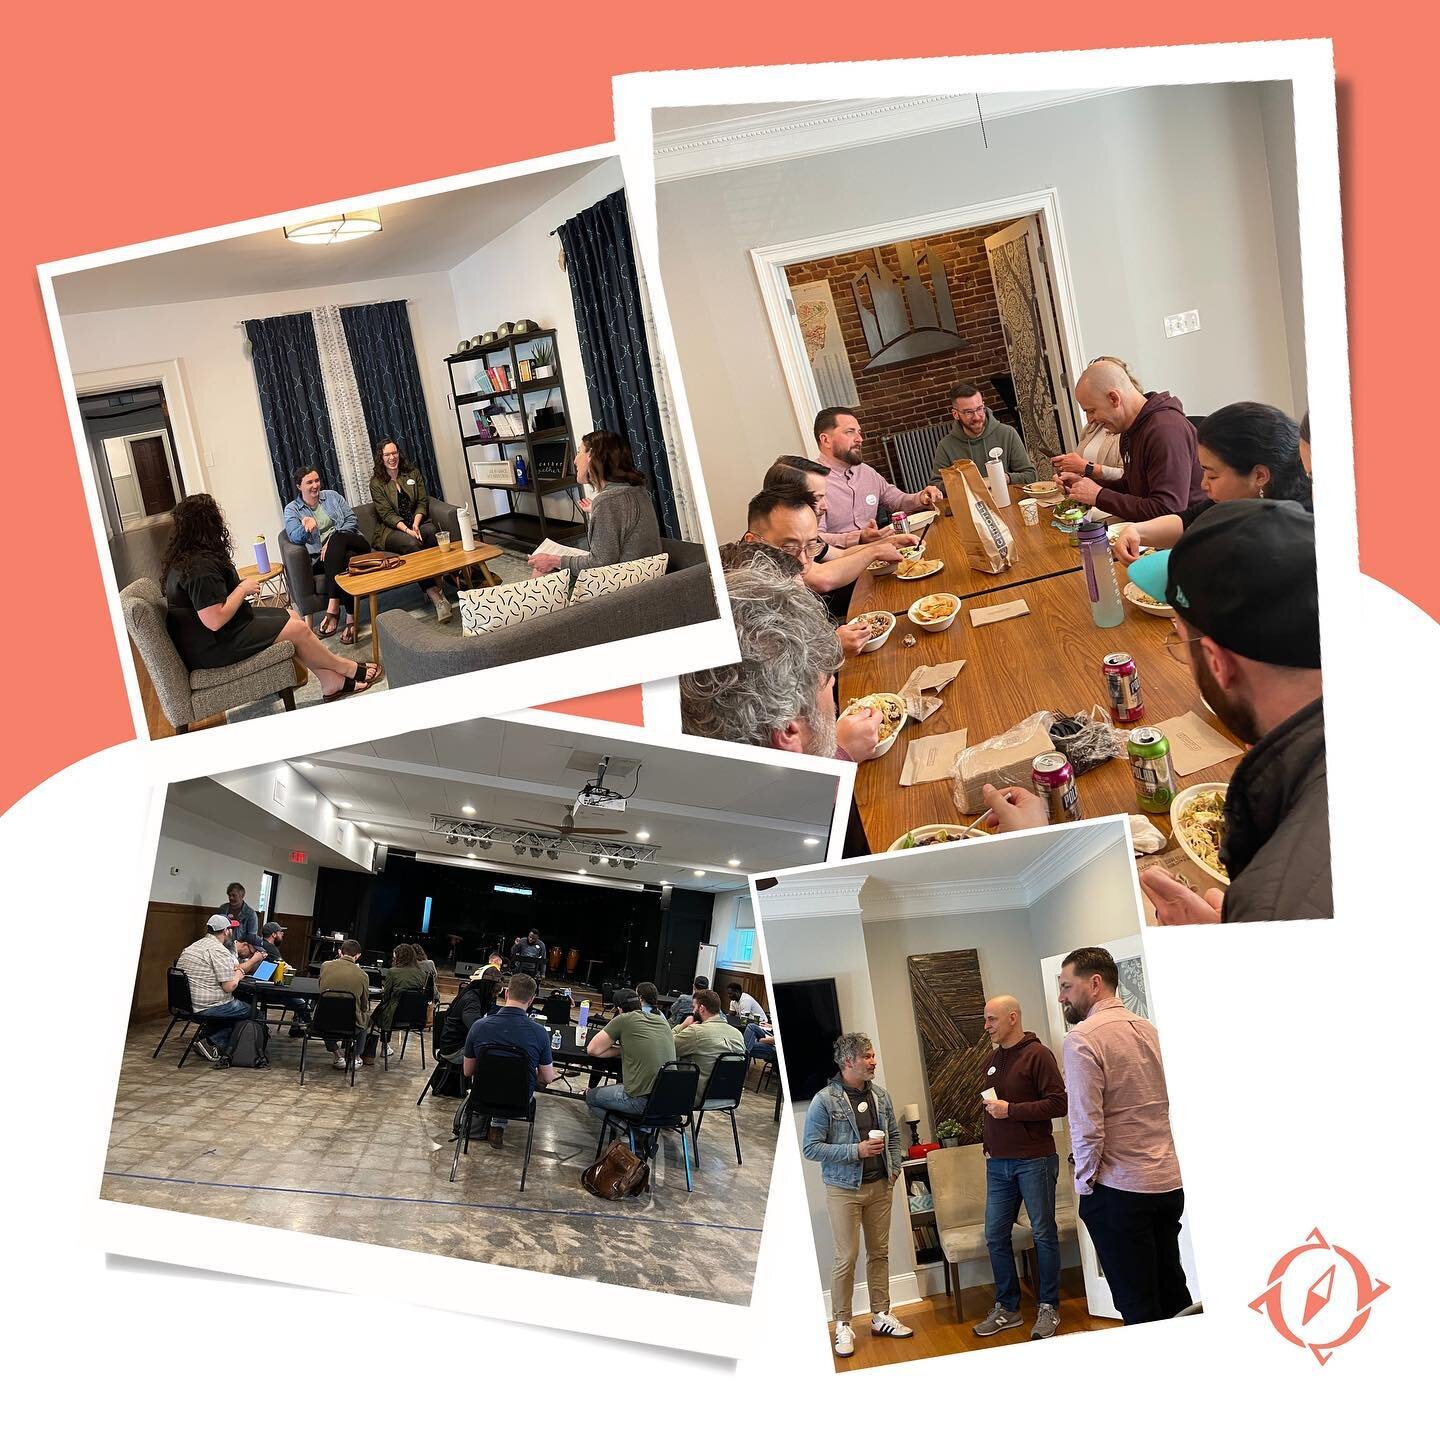 Our Leader Renewal team was busy this week leading 3 Renewal Gatherings in Charlotte, Richmond and Boston! Led by Ronnie and Melissa Martin, these localized gatherings are for Harbor pastors, wives, and other ministry leaders. With over 60 folks in a